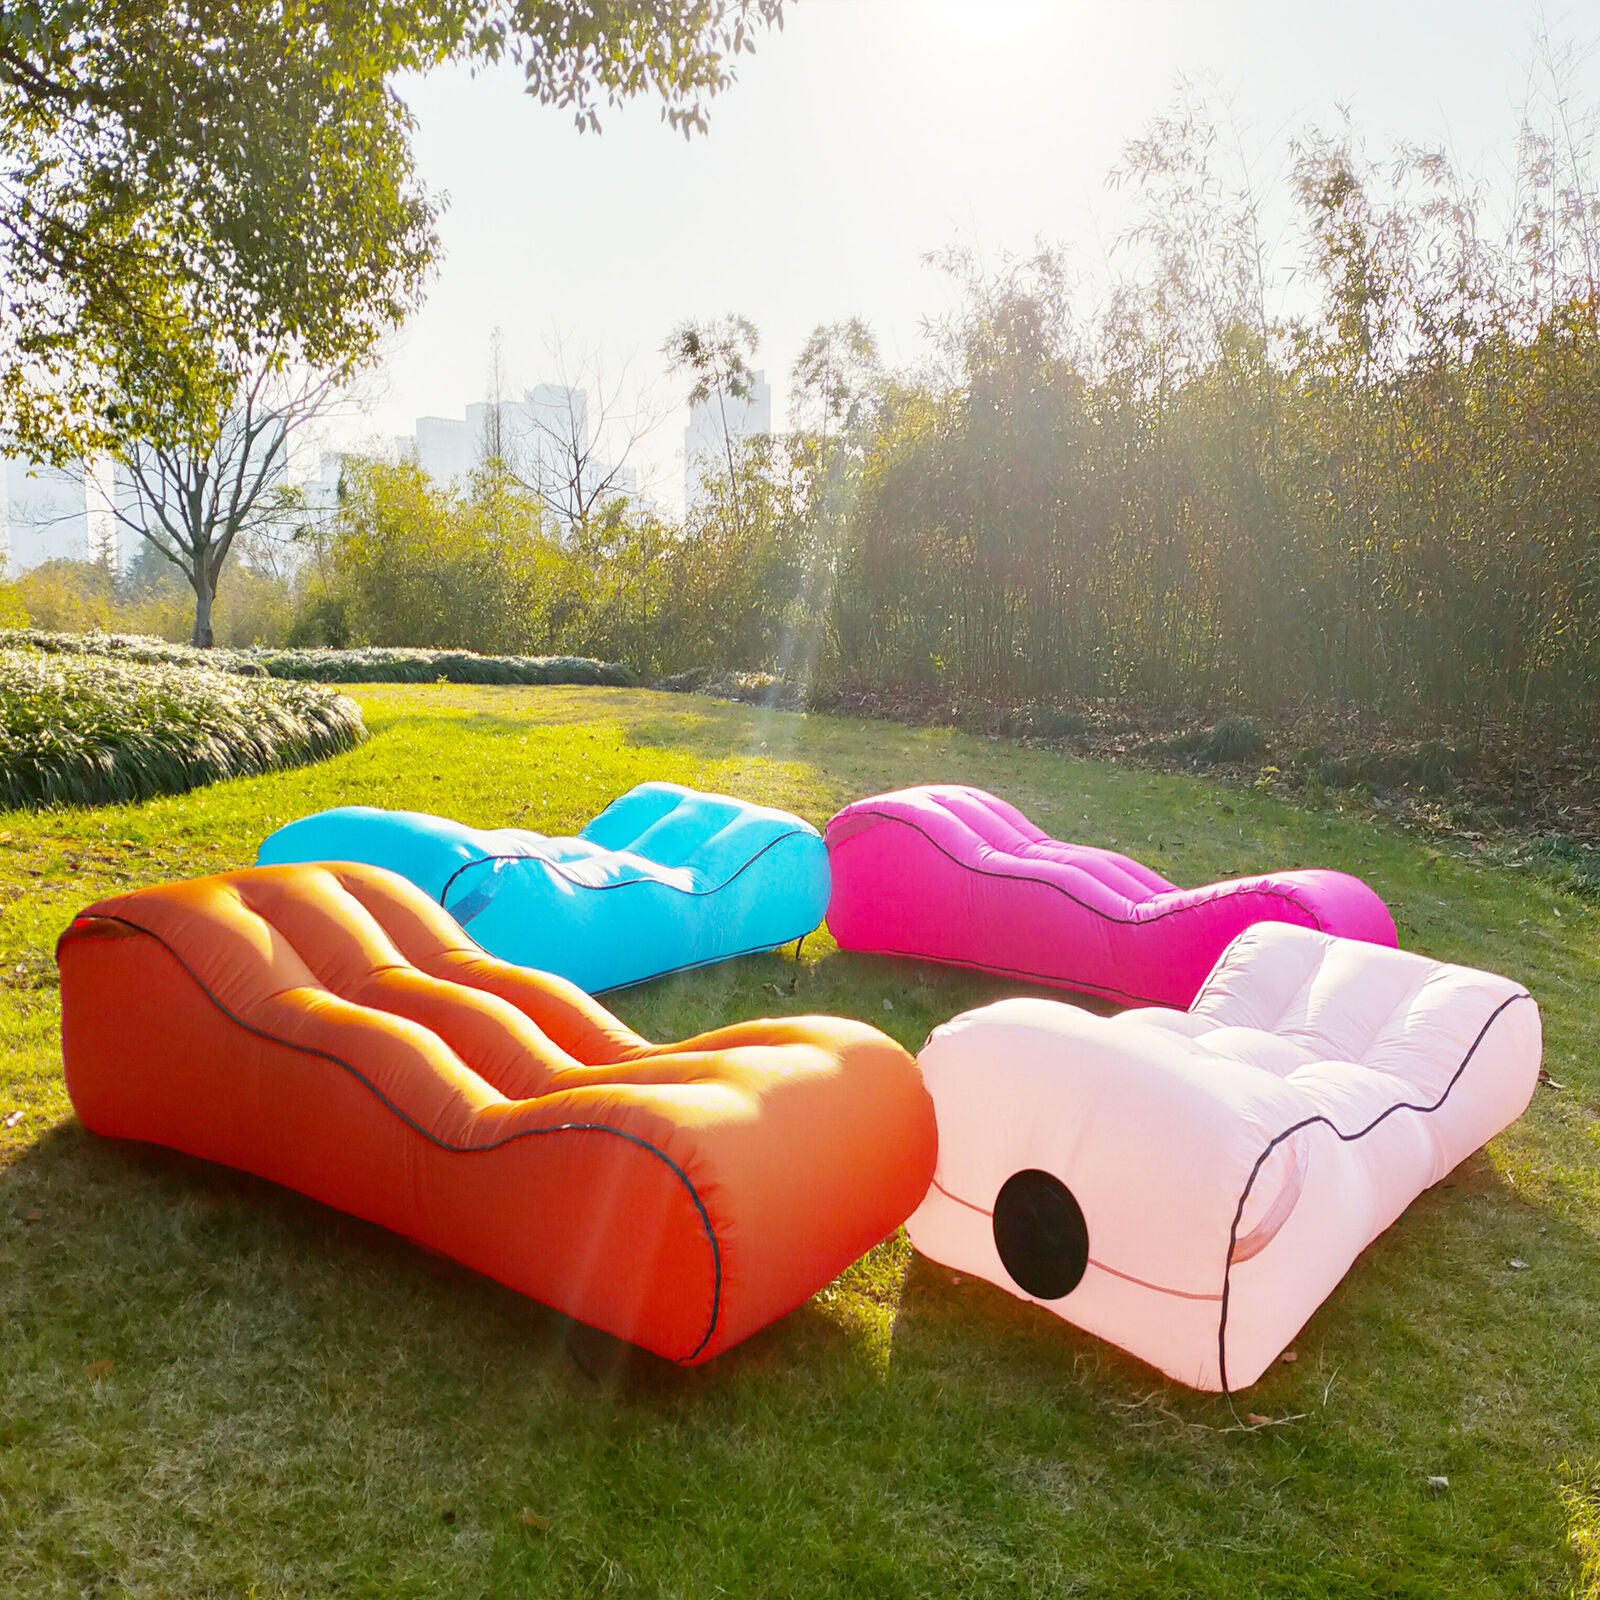 Fifth Must-Have - Inflatable Lounger/ Hammock